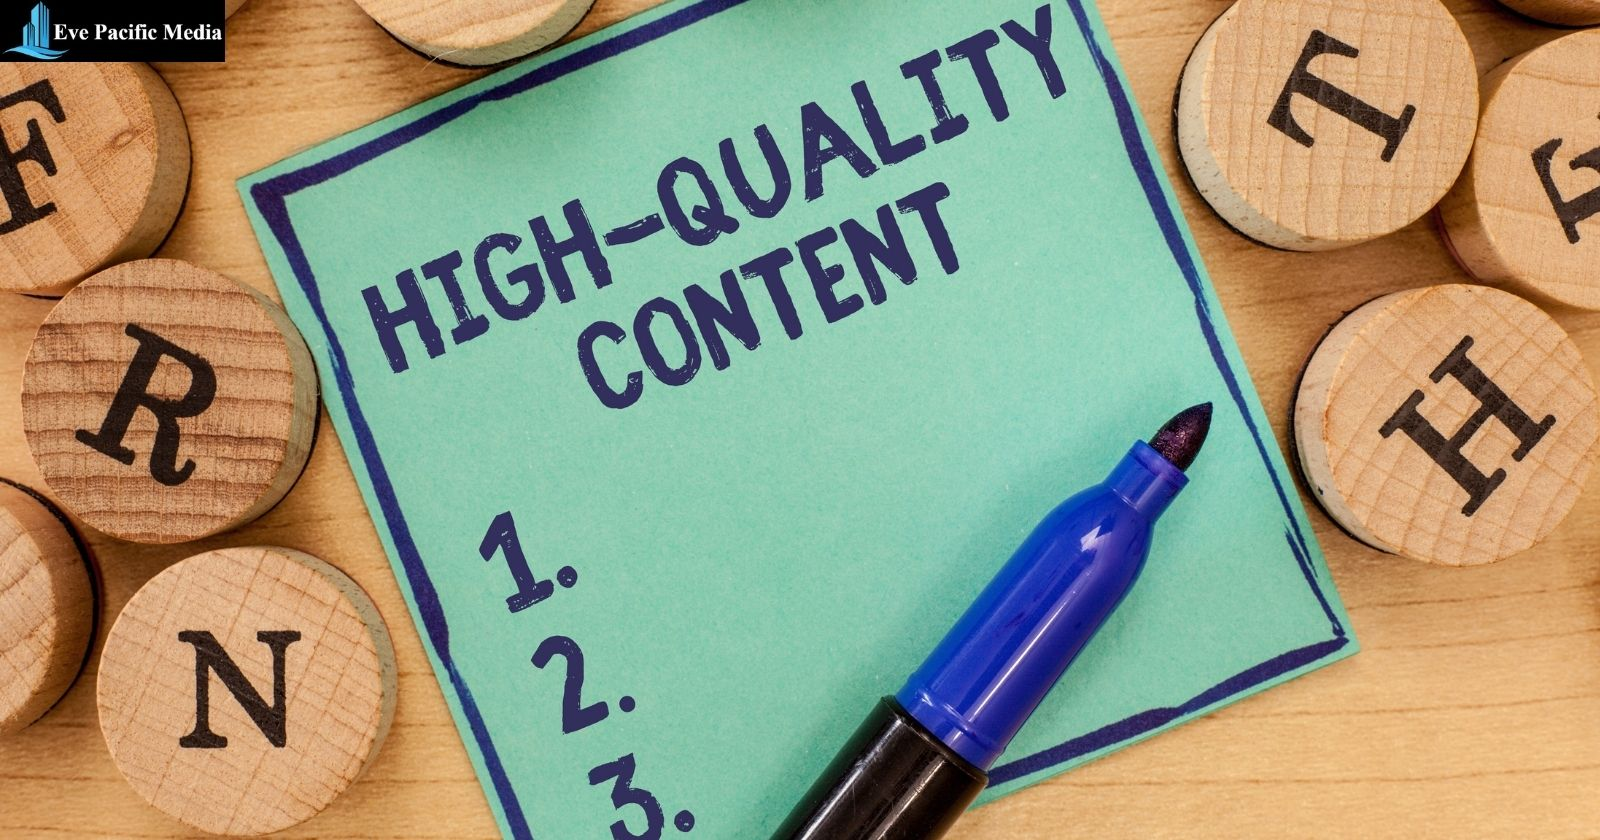 Copy pen with a text "High quality content": Affiliate Marketing Content